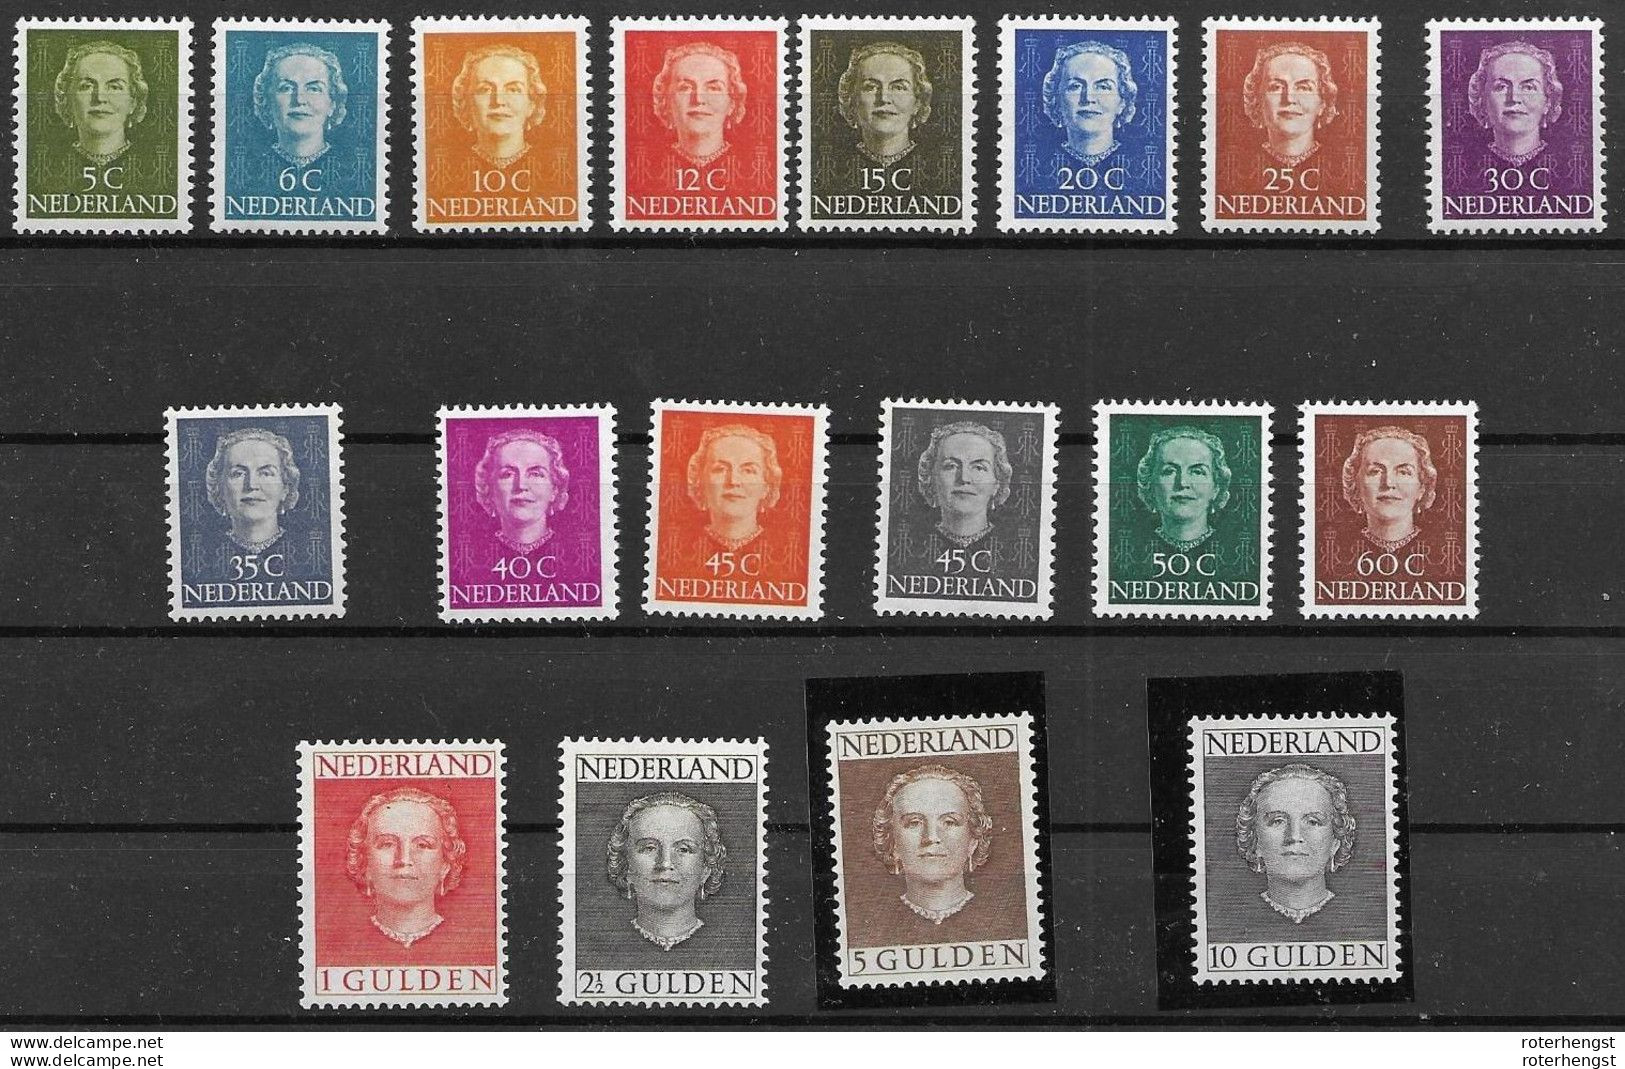 Netherlands 1250 Euros Mnh ** All Very Clean Original Gum, Only 10G Has Quasi Invisible 0,5cm Hinge Trace - Neufs